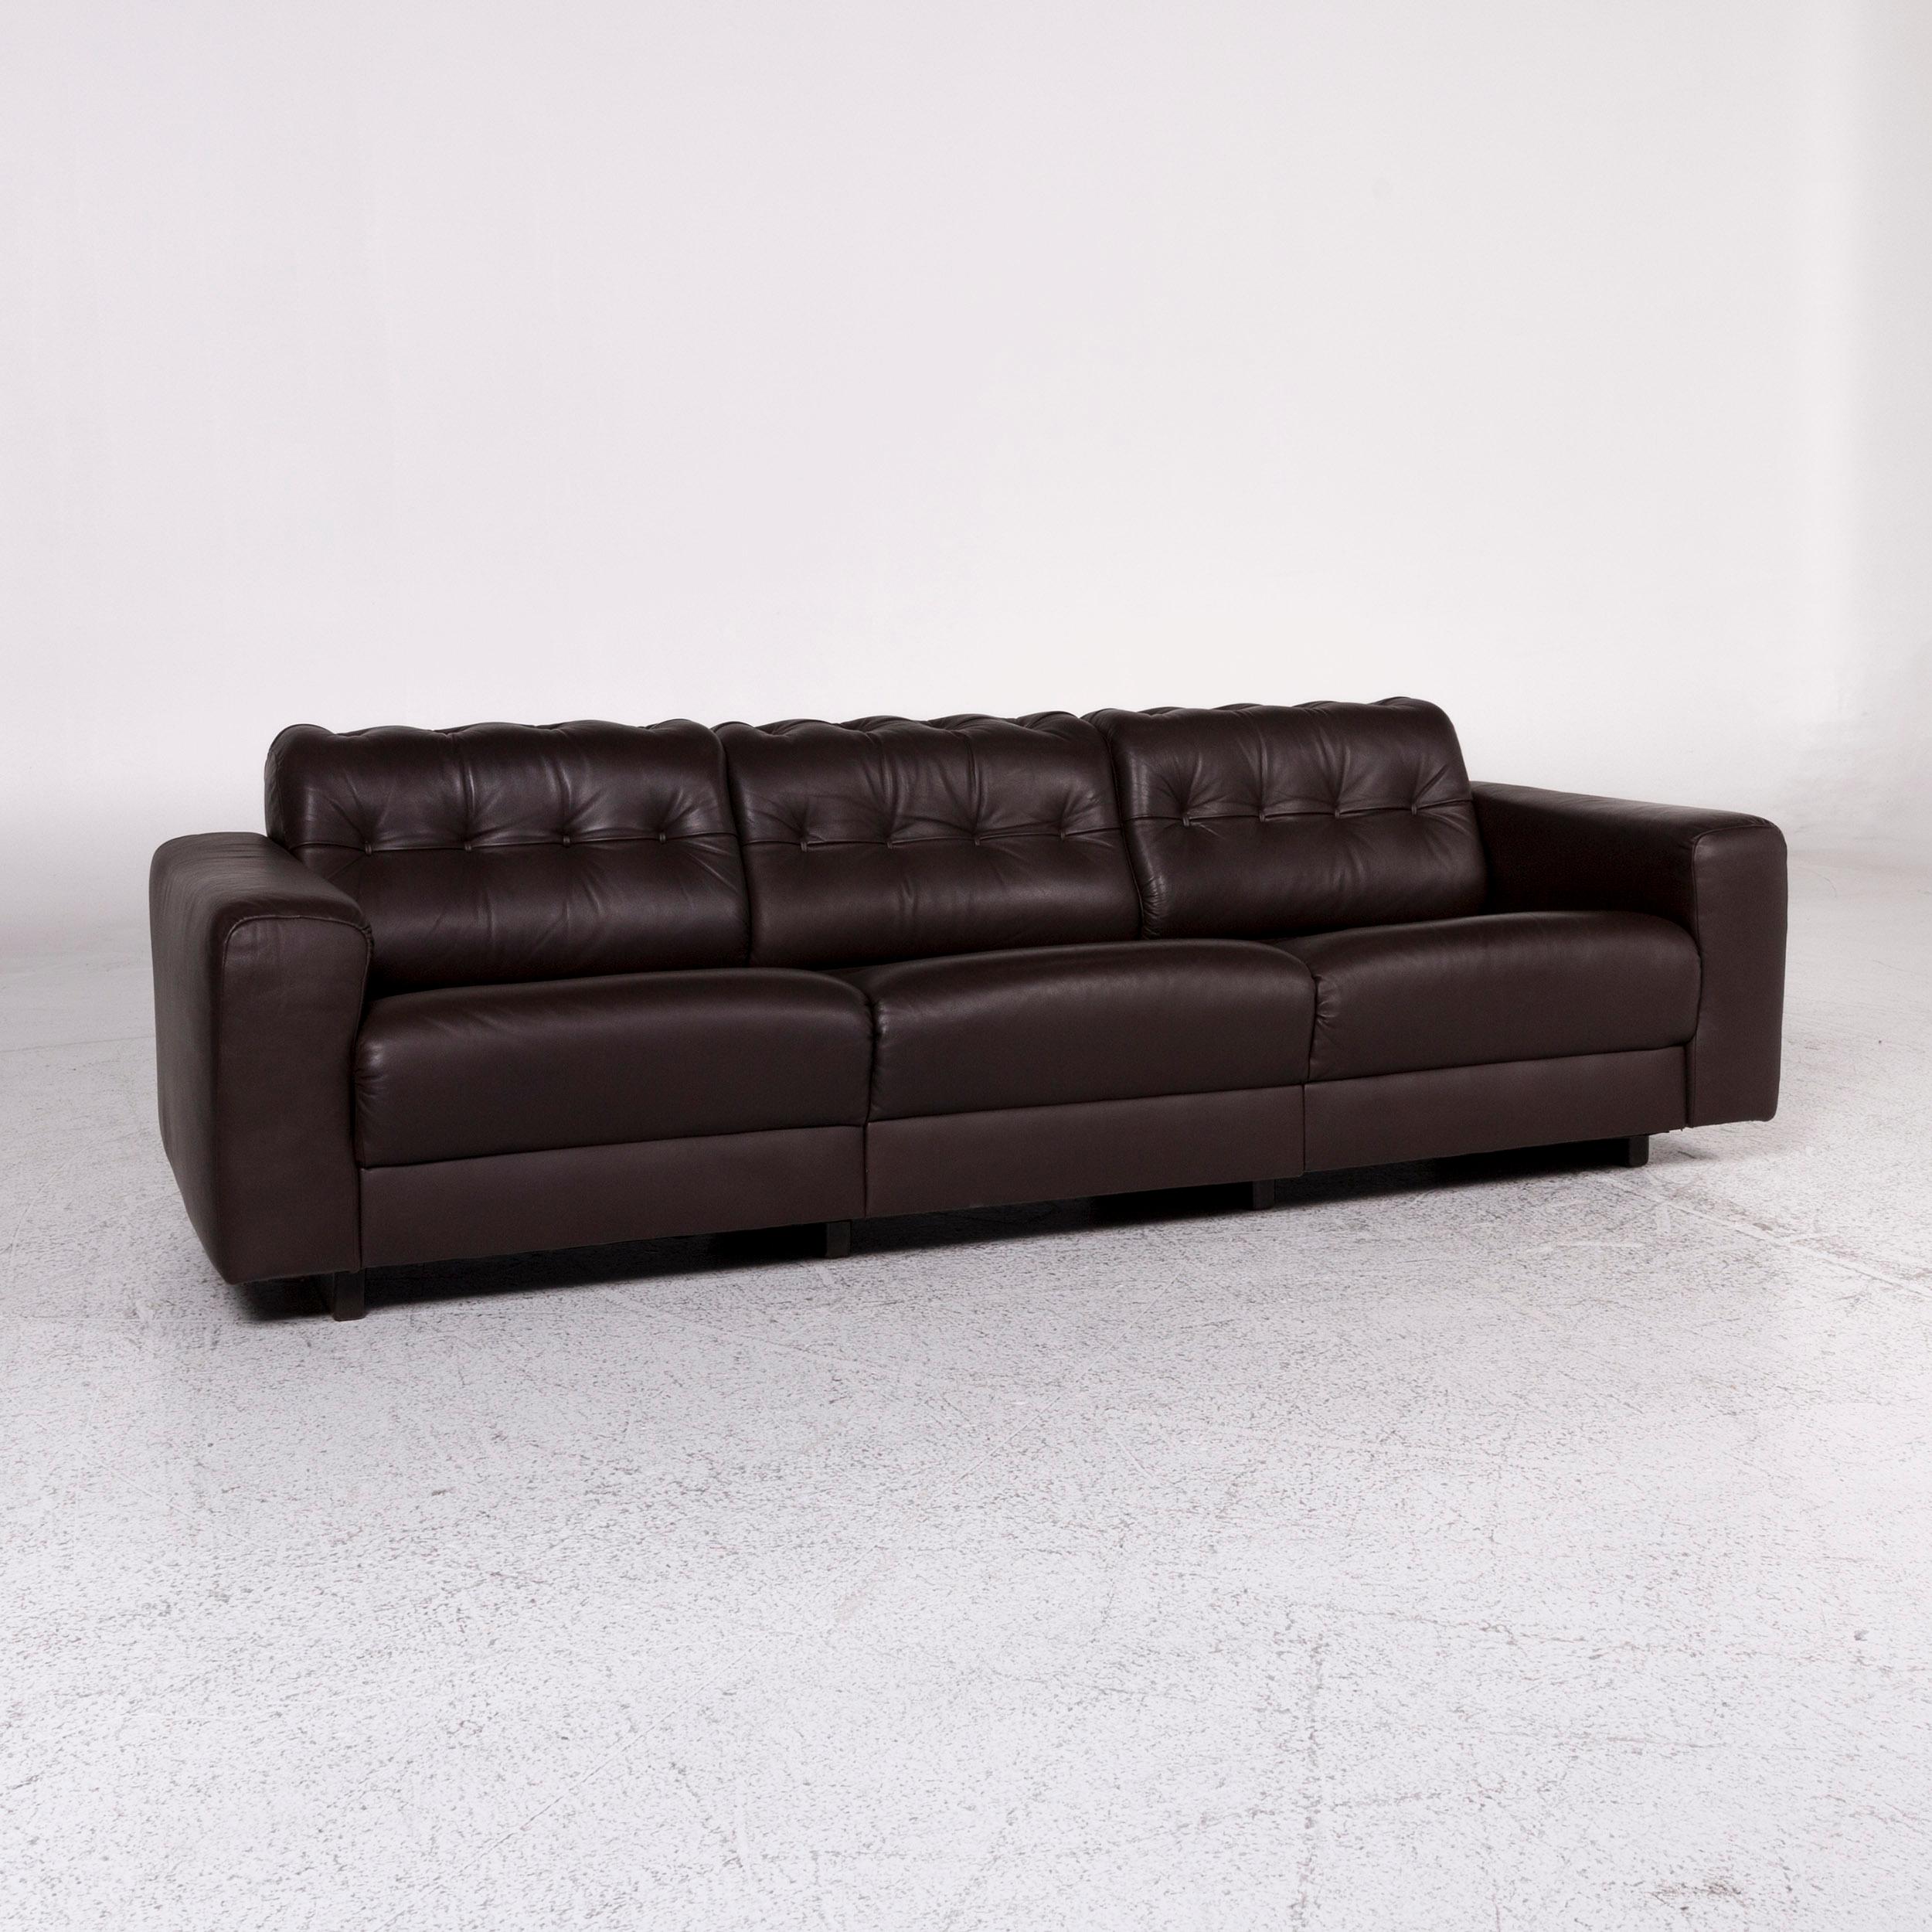 We bring to you a De Sede leather sofa set brown 1x three-seat 1x two-seat 2x armchair.

 Product measurements in centimeters:
 
Depth: 82
Width: 2146
Height: 64
Seat-height: 38
Rest-height: 52
Seat-depth: 178
Seat-width: 58
Back-height: